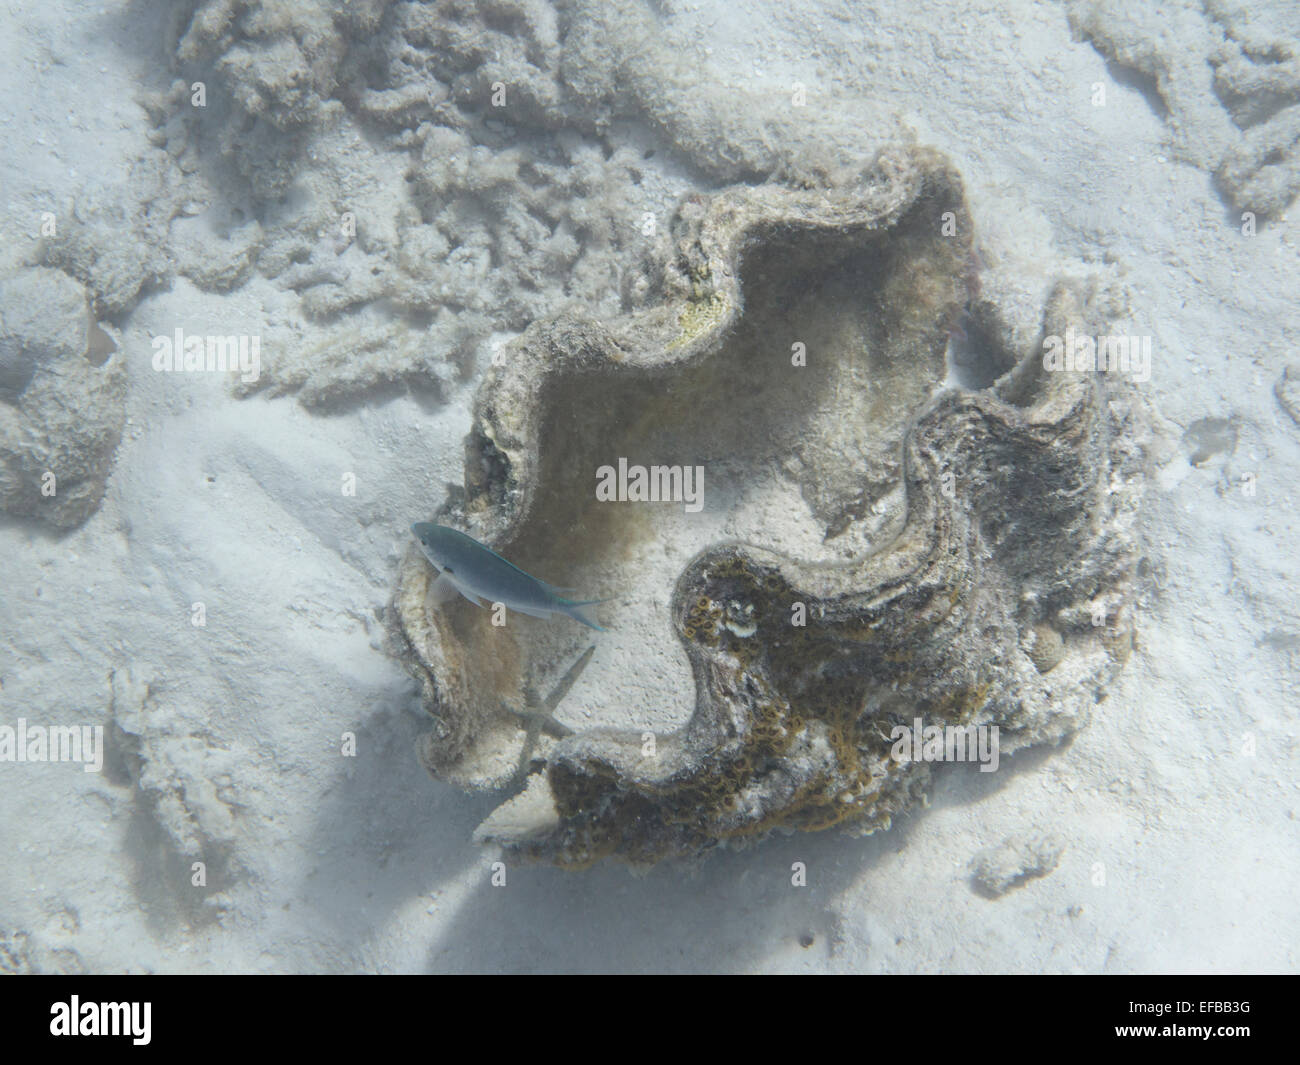 Giant oyster amongst coral in the shallow waters off a Maldivian island Stock Photo